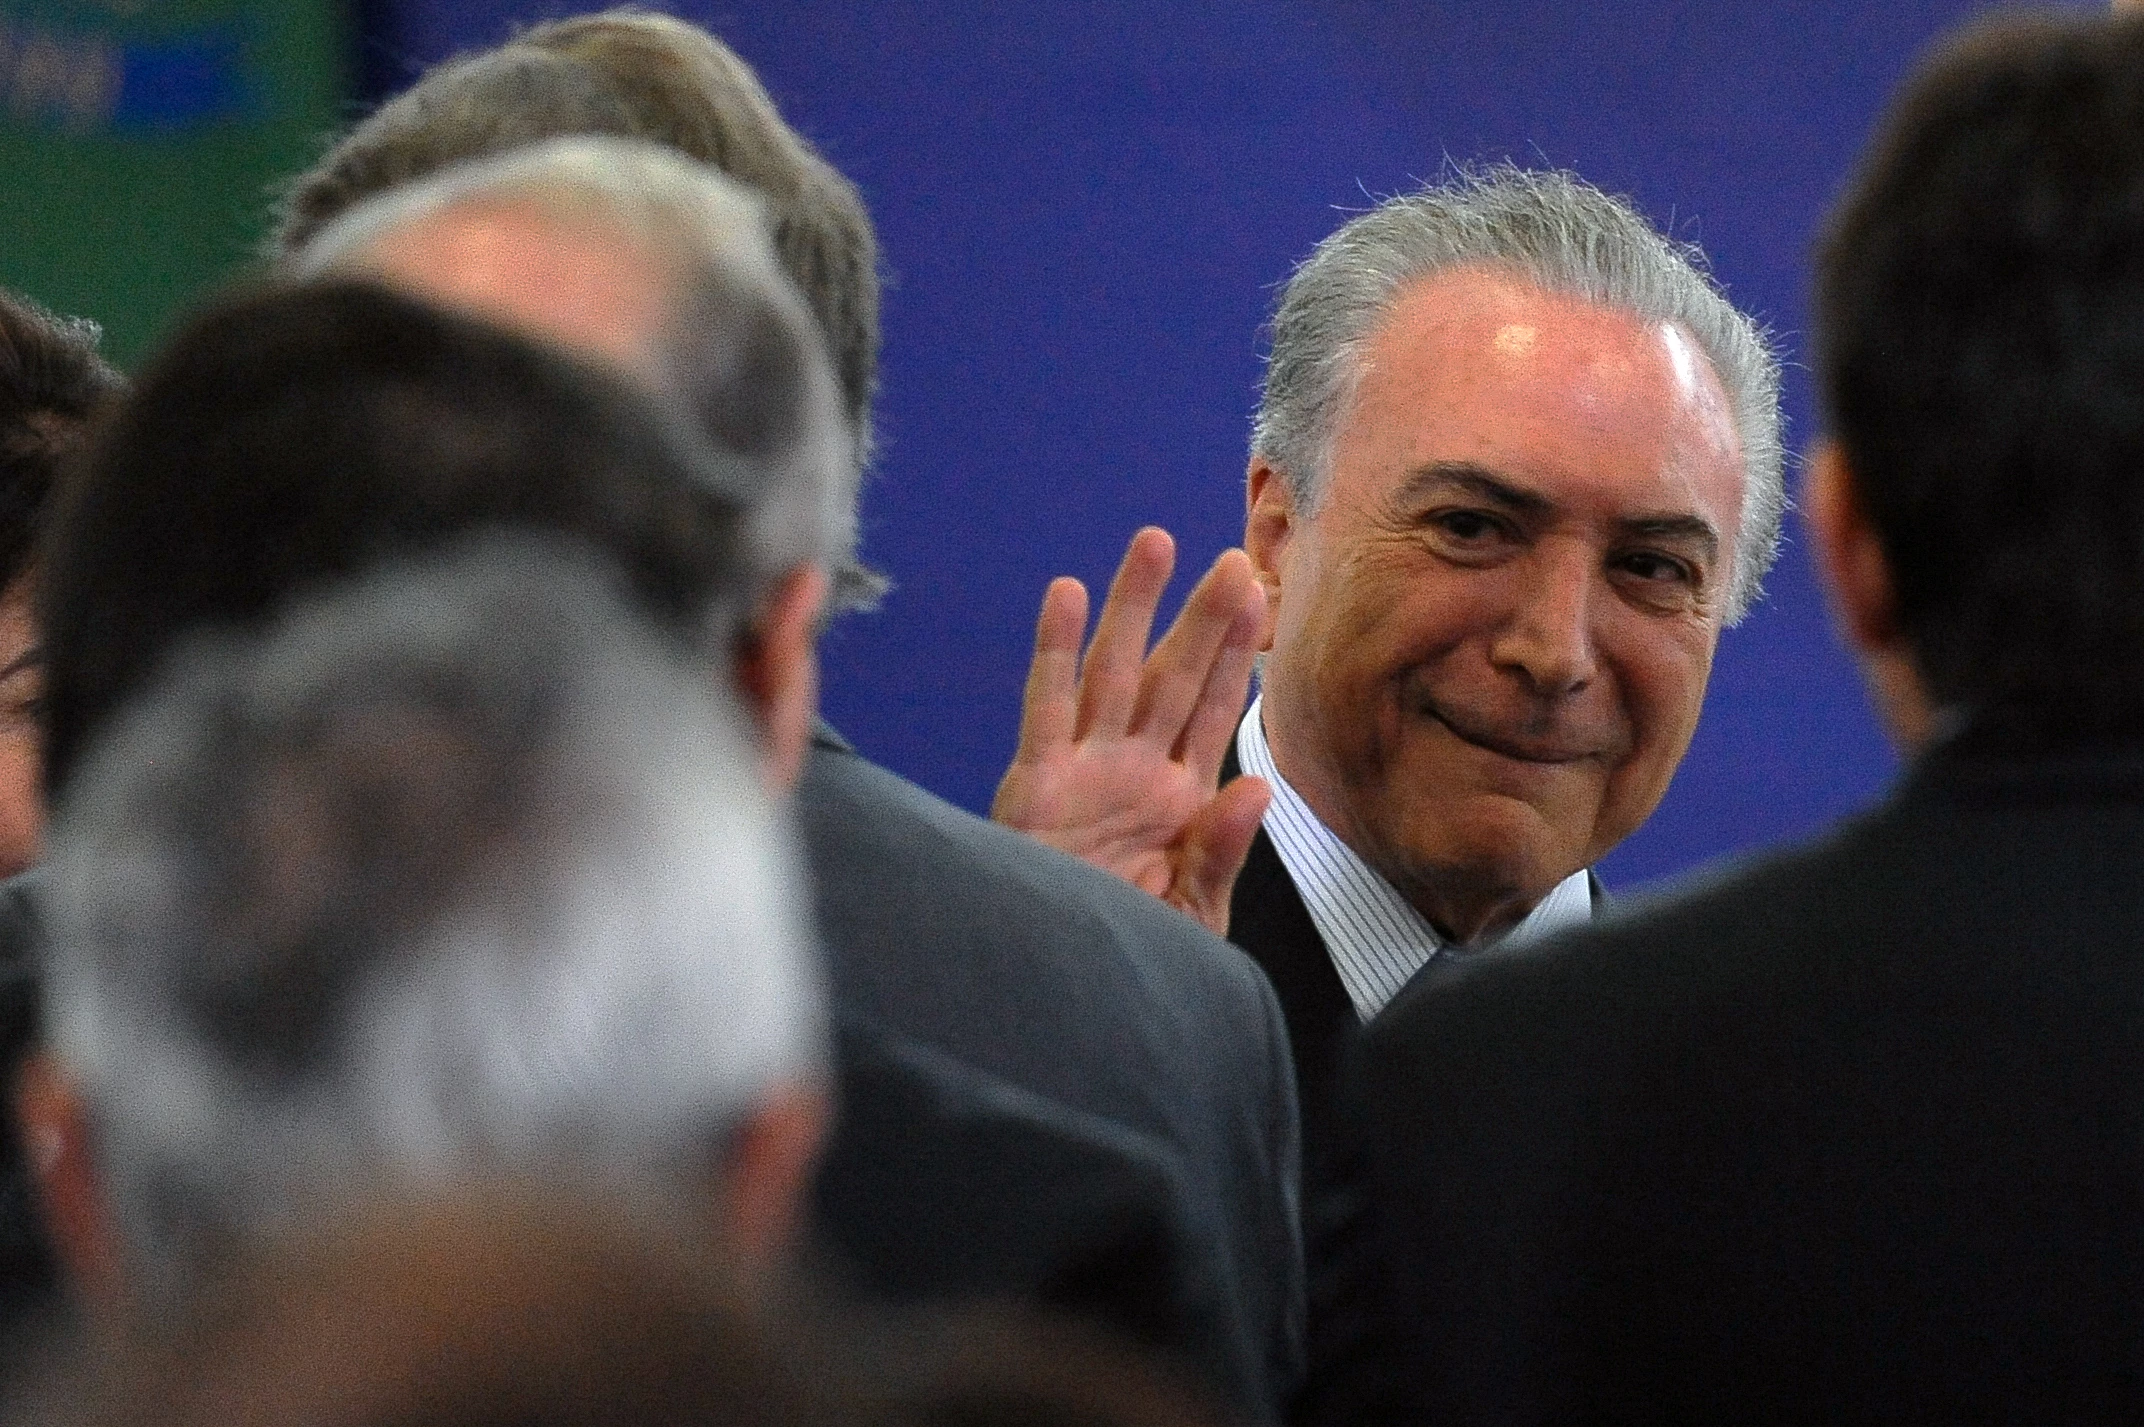 Brazilian President Michel Temer, attends the announcement of new funds for the school lunch program at the Planalto Palace, in Brasilia on February 8, 2017.  / AFP / ANDRESSA ANHOLETE        (Photo credit should read ANDRESSA ANHOLETE/AFP/Getty Images)